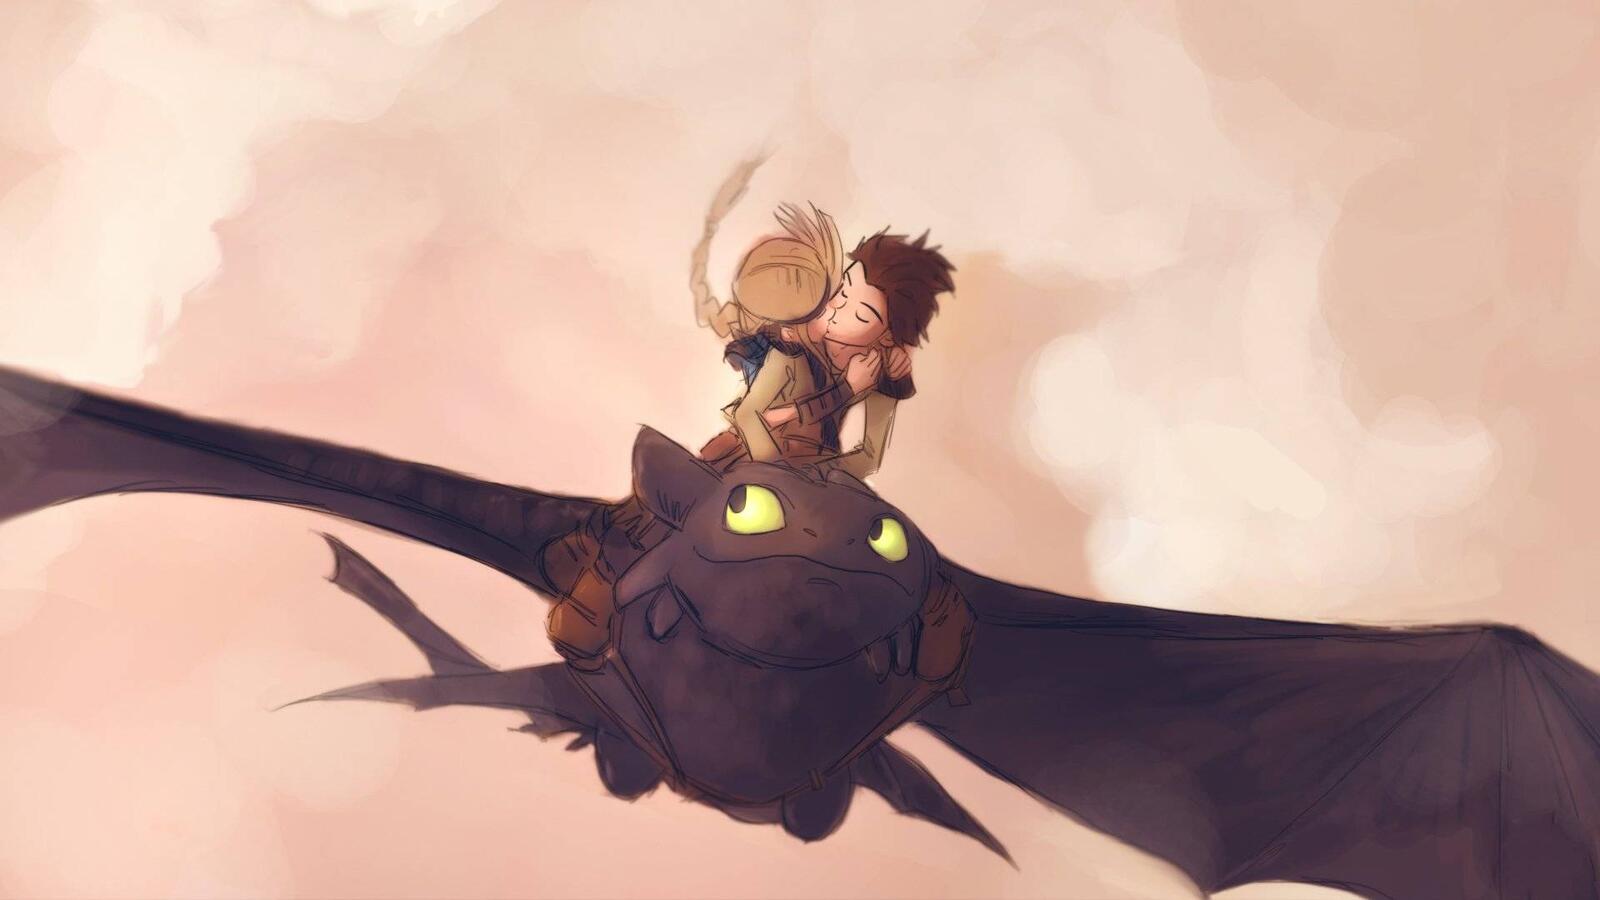 Wallpapers how to train a dragon boy girl on the desktop